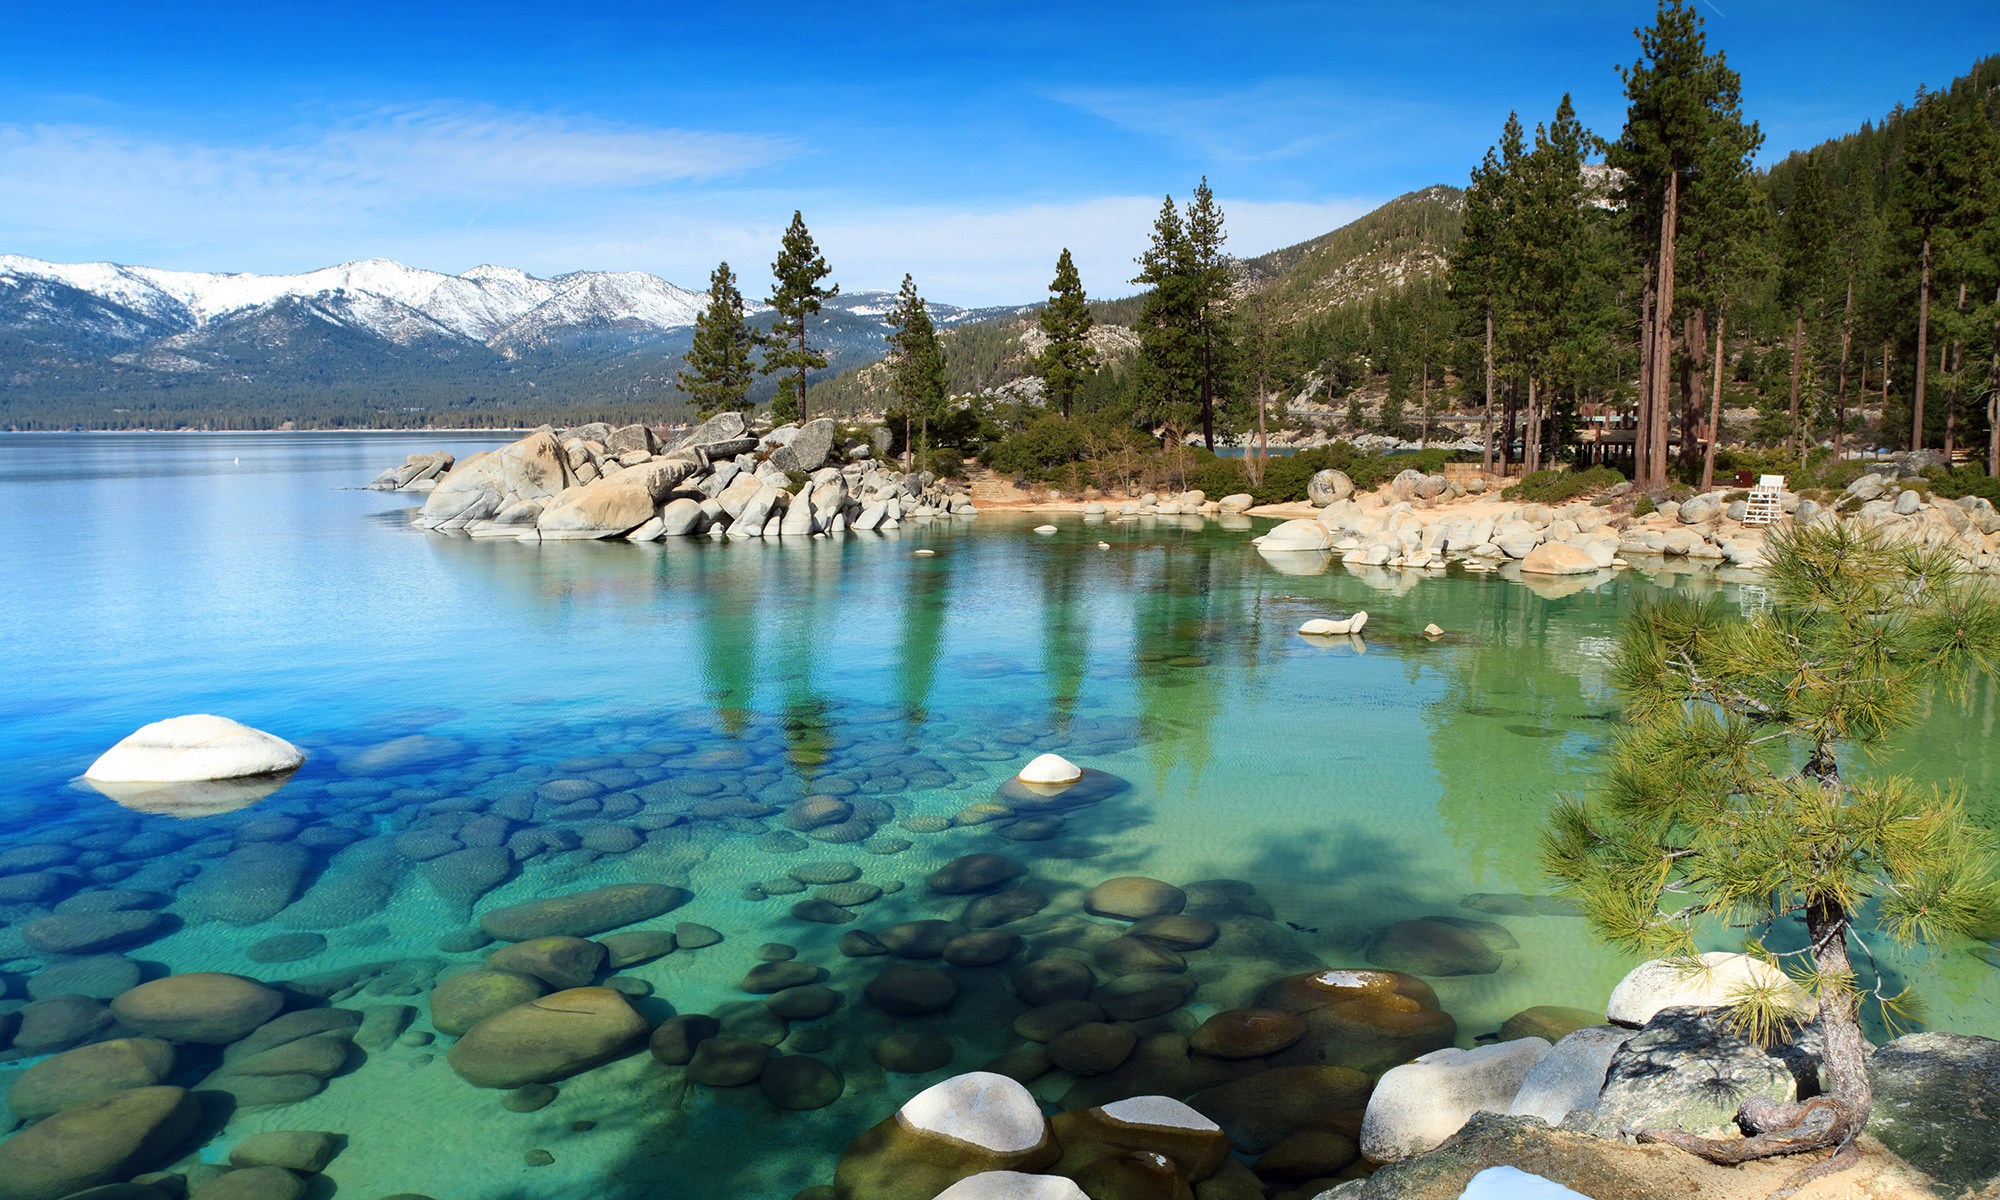 Lake Tahoe with clear water surrounded by snow cap mountains and trees